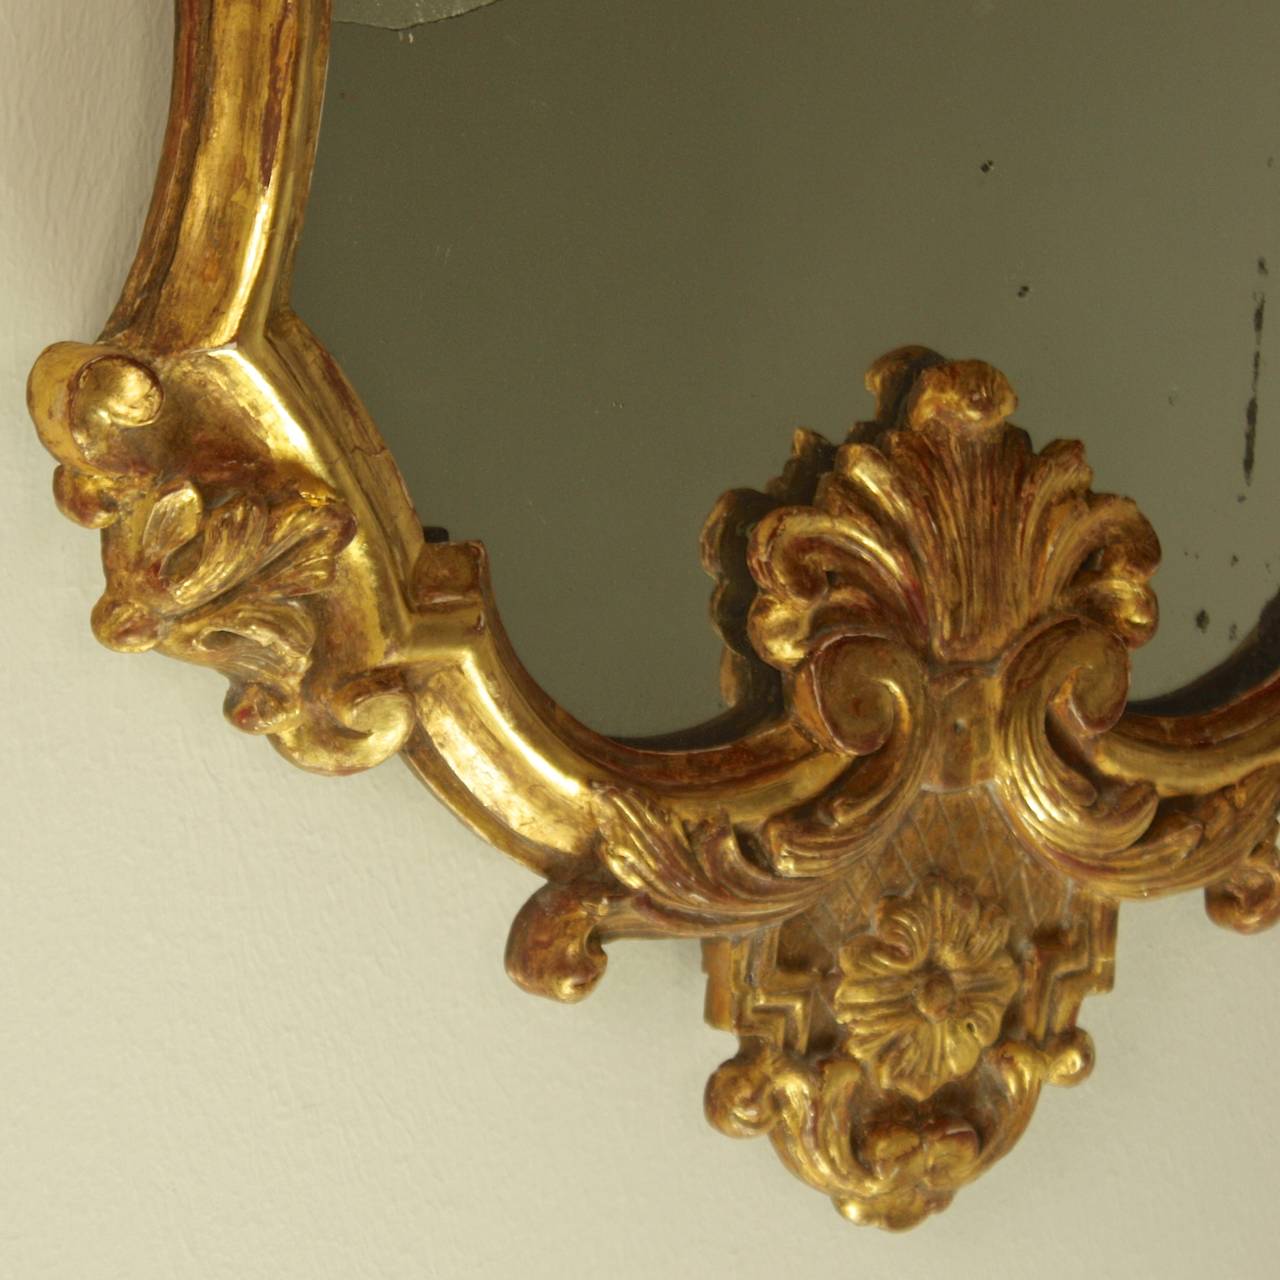 Carved Pair of Early 18th Century Louis XIV Giltwood Mirrors, circa 1710